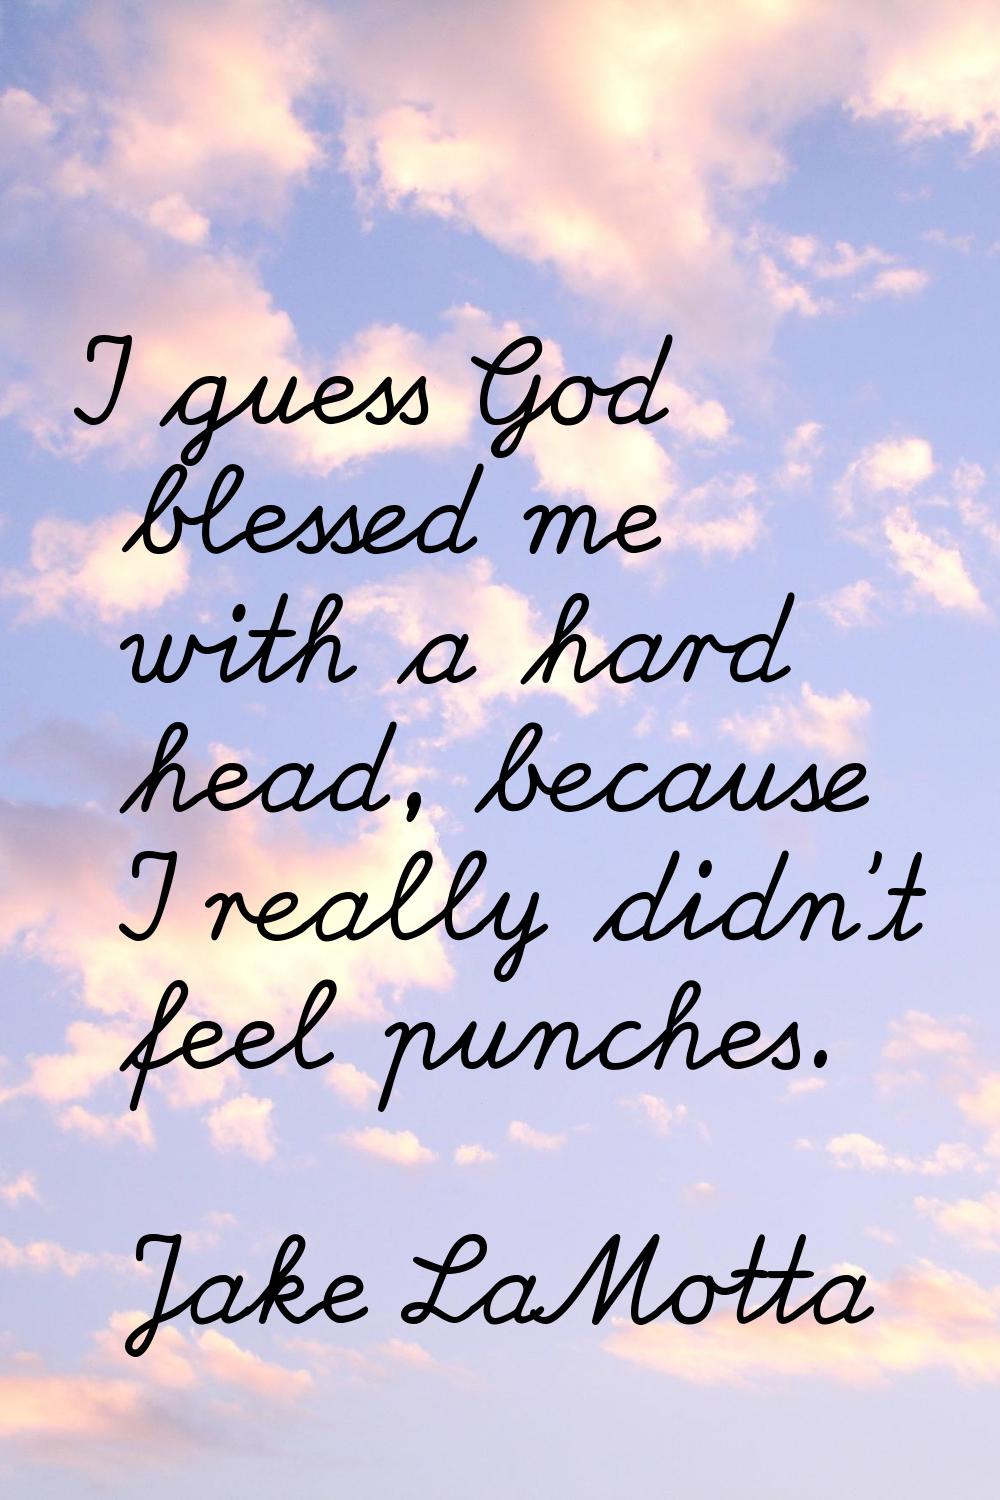 I guess God blessed me with a hard head, because I really didn't feel punches.